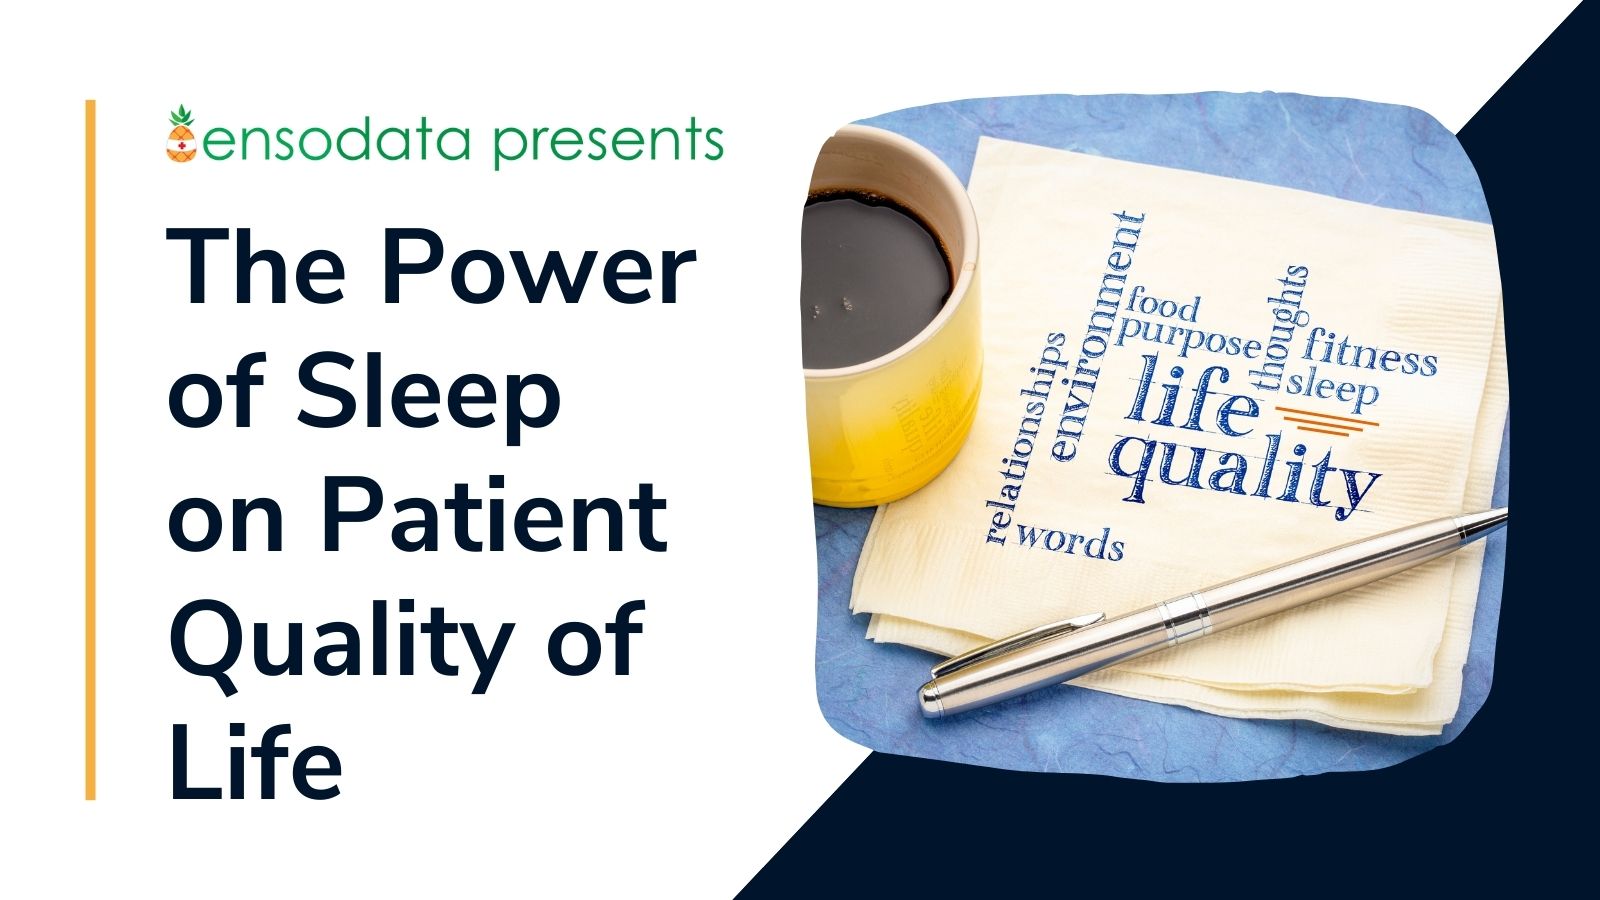 EnsoData Blog Post Hero Image - The Power of Sleep on Patient Quality of Life